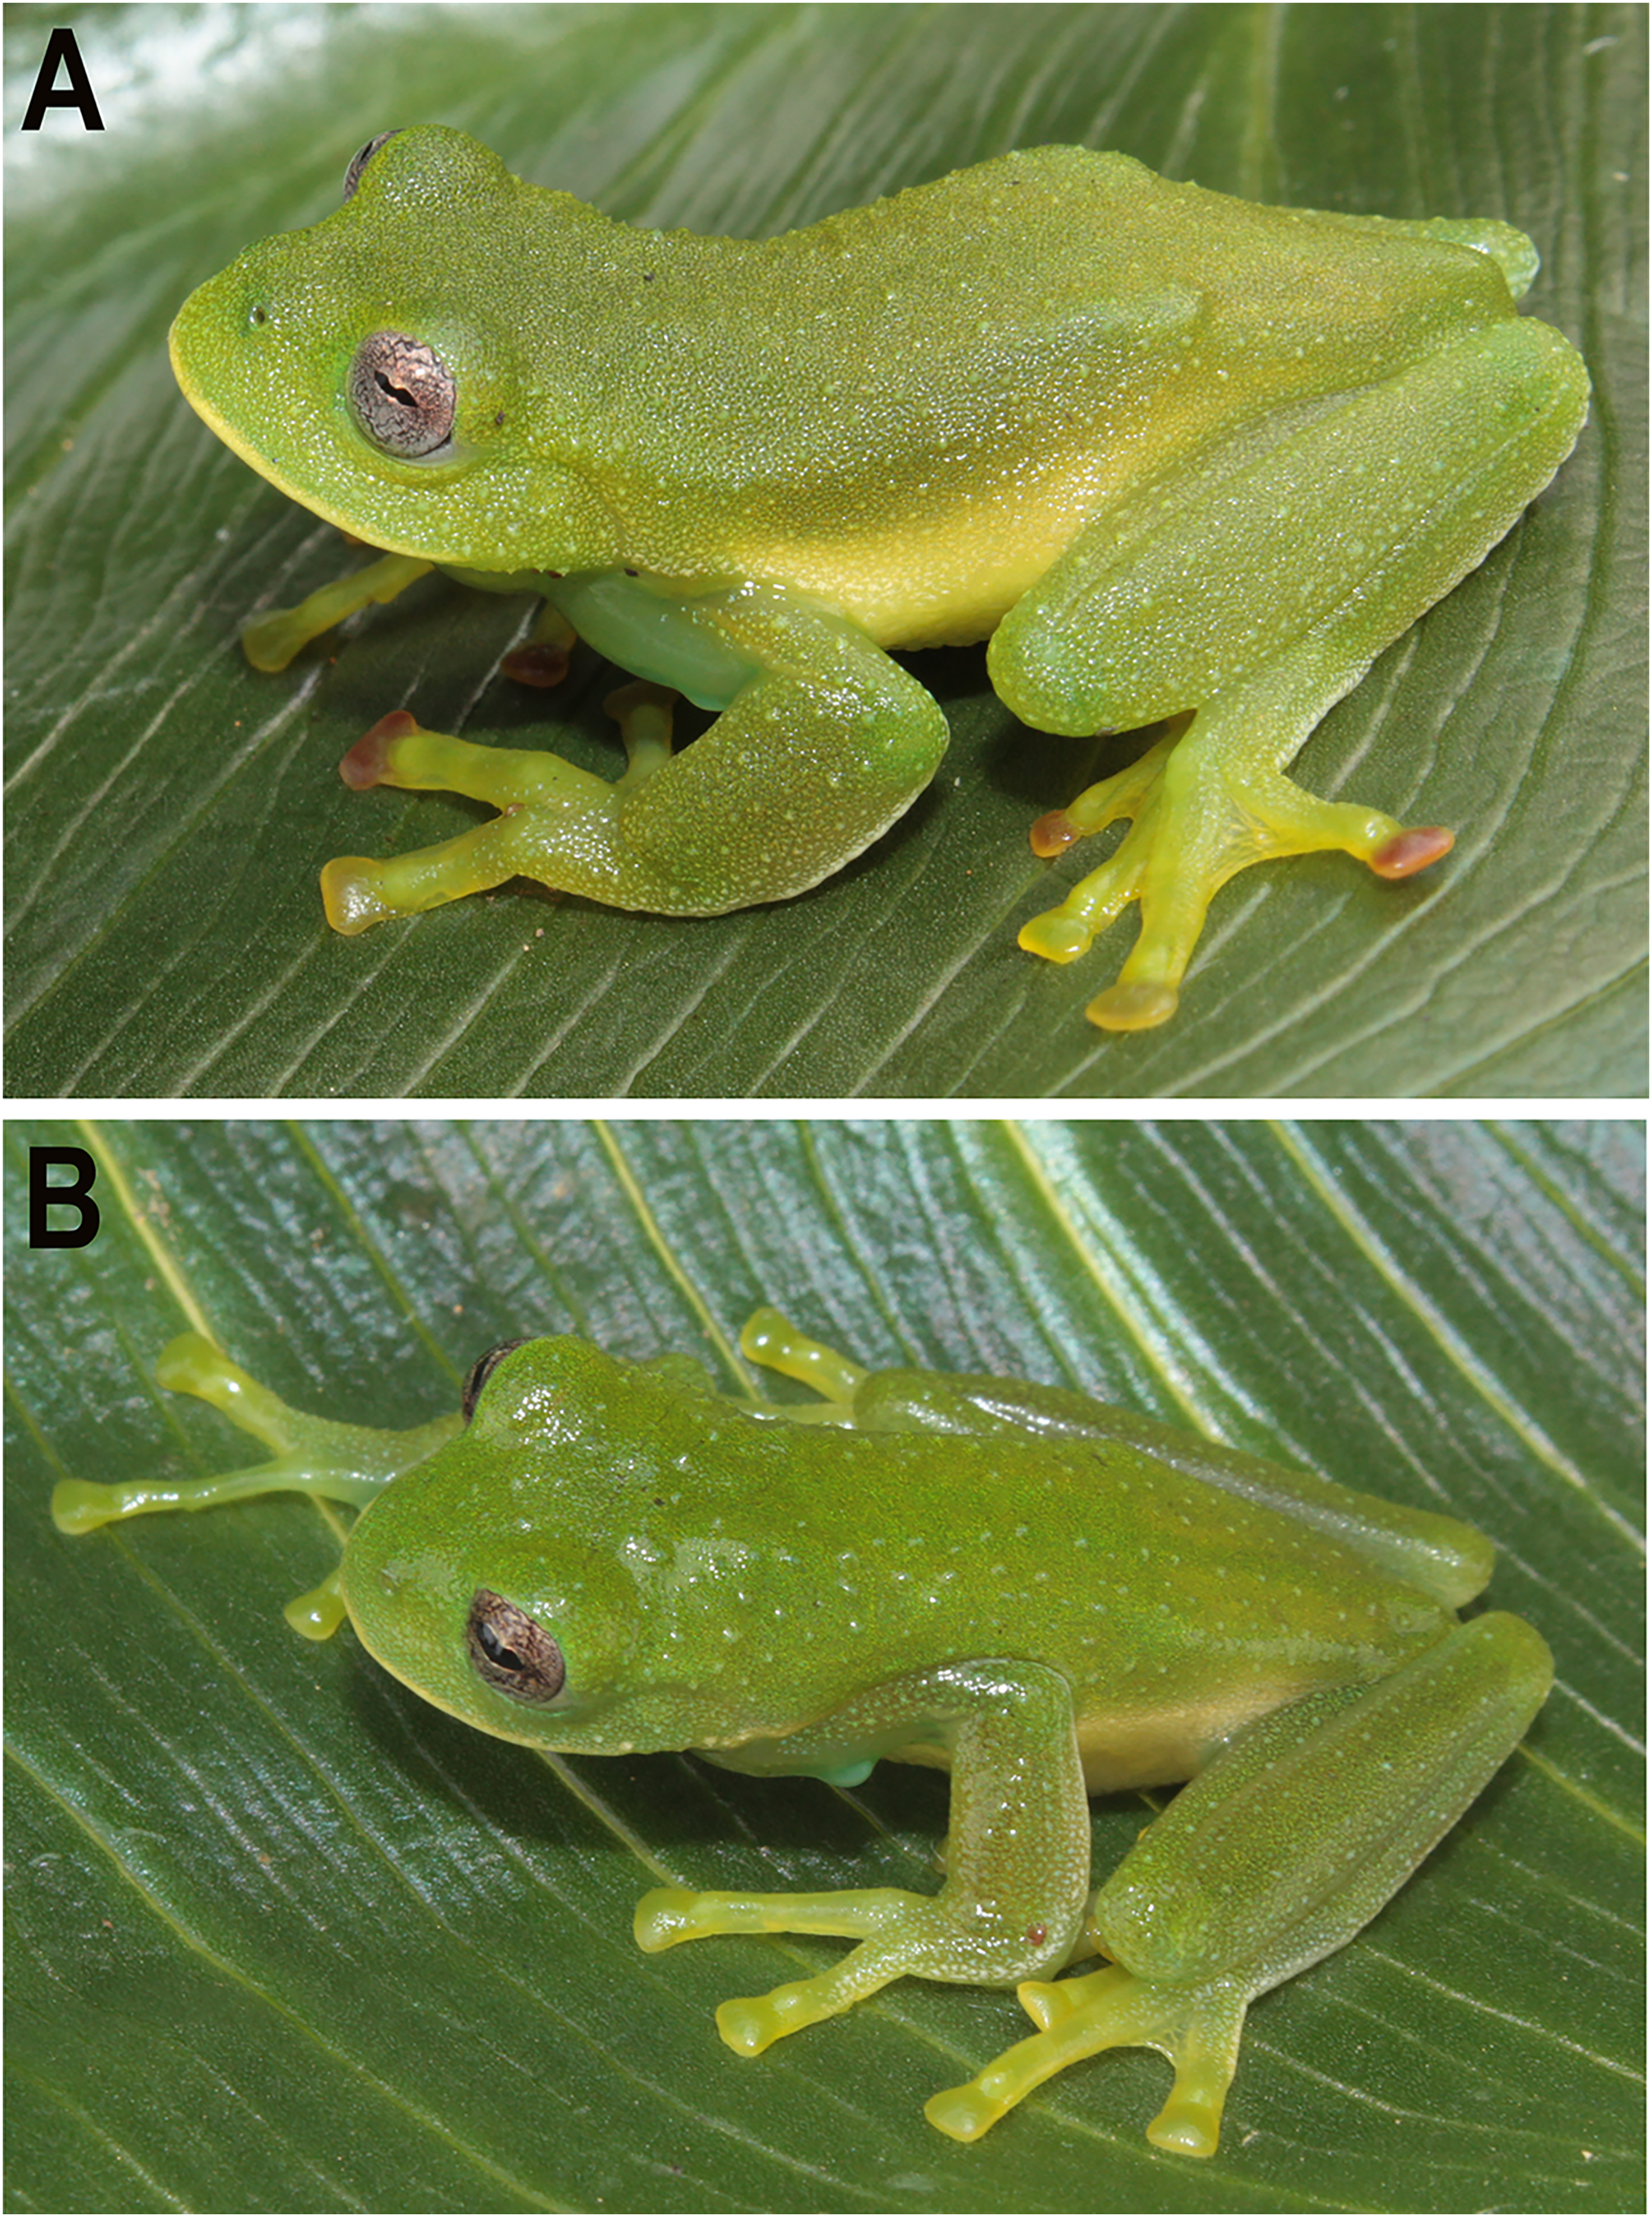 Two new syntopic species of glassfrogs (Amphibia, Centrolenidae,  Centrolene) from the southwestern Andes of Ecuador [PeerJ]